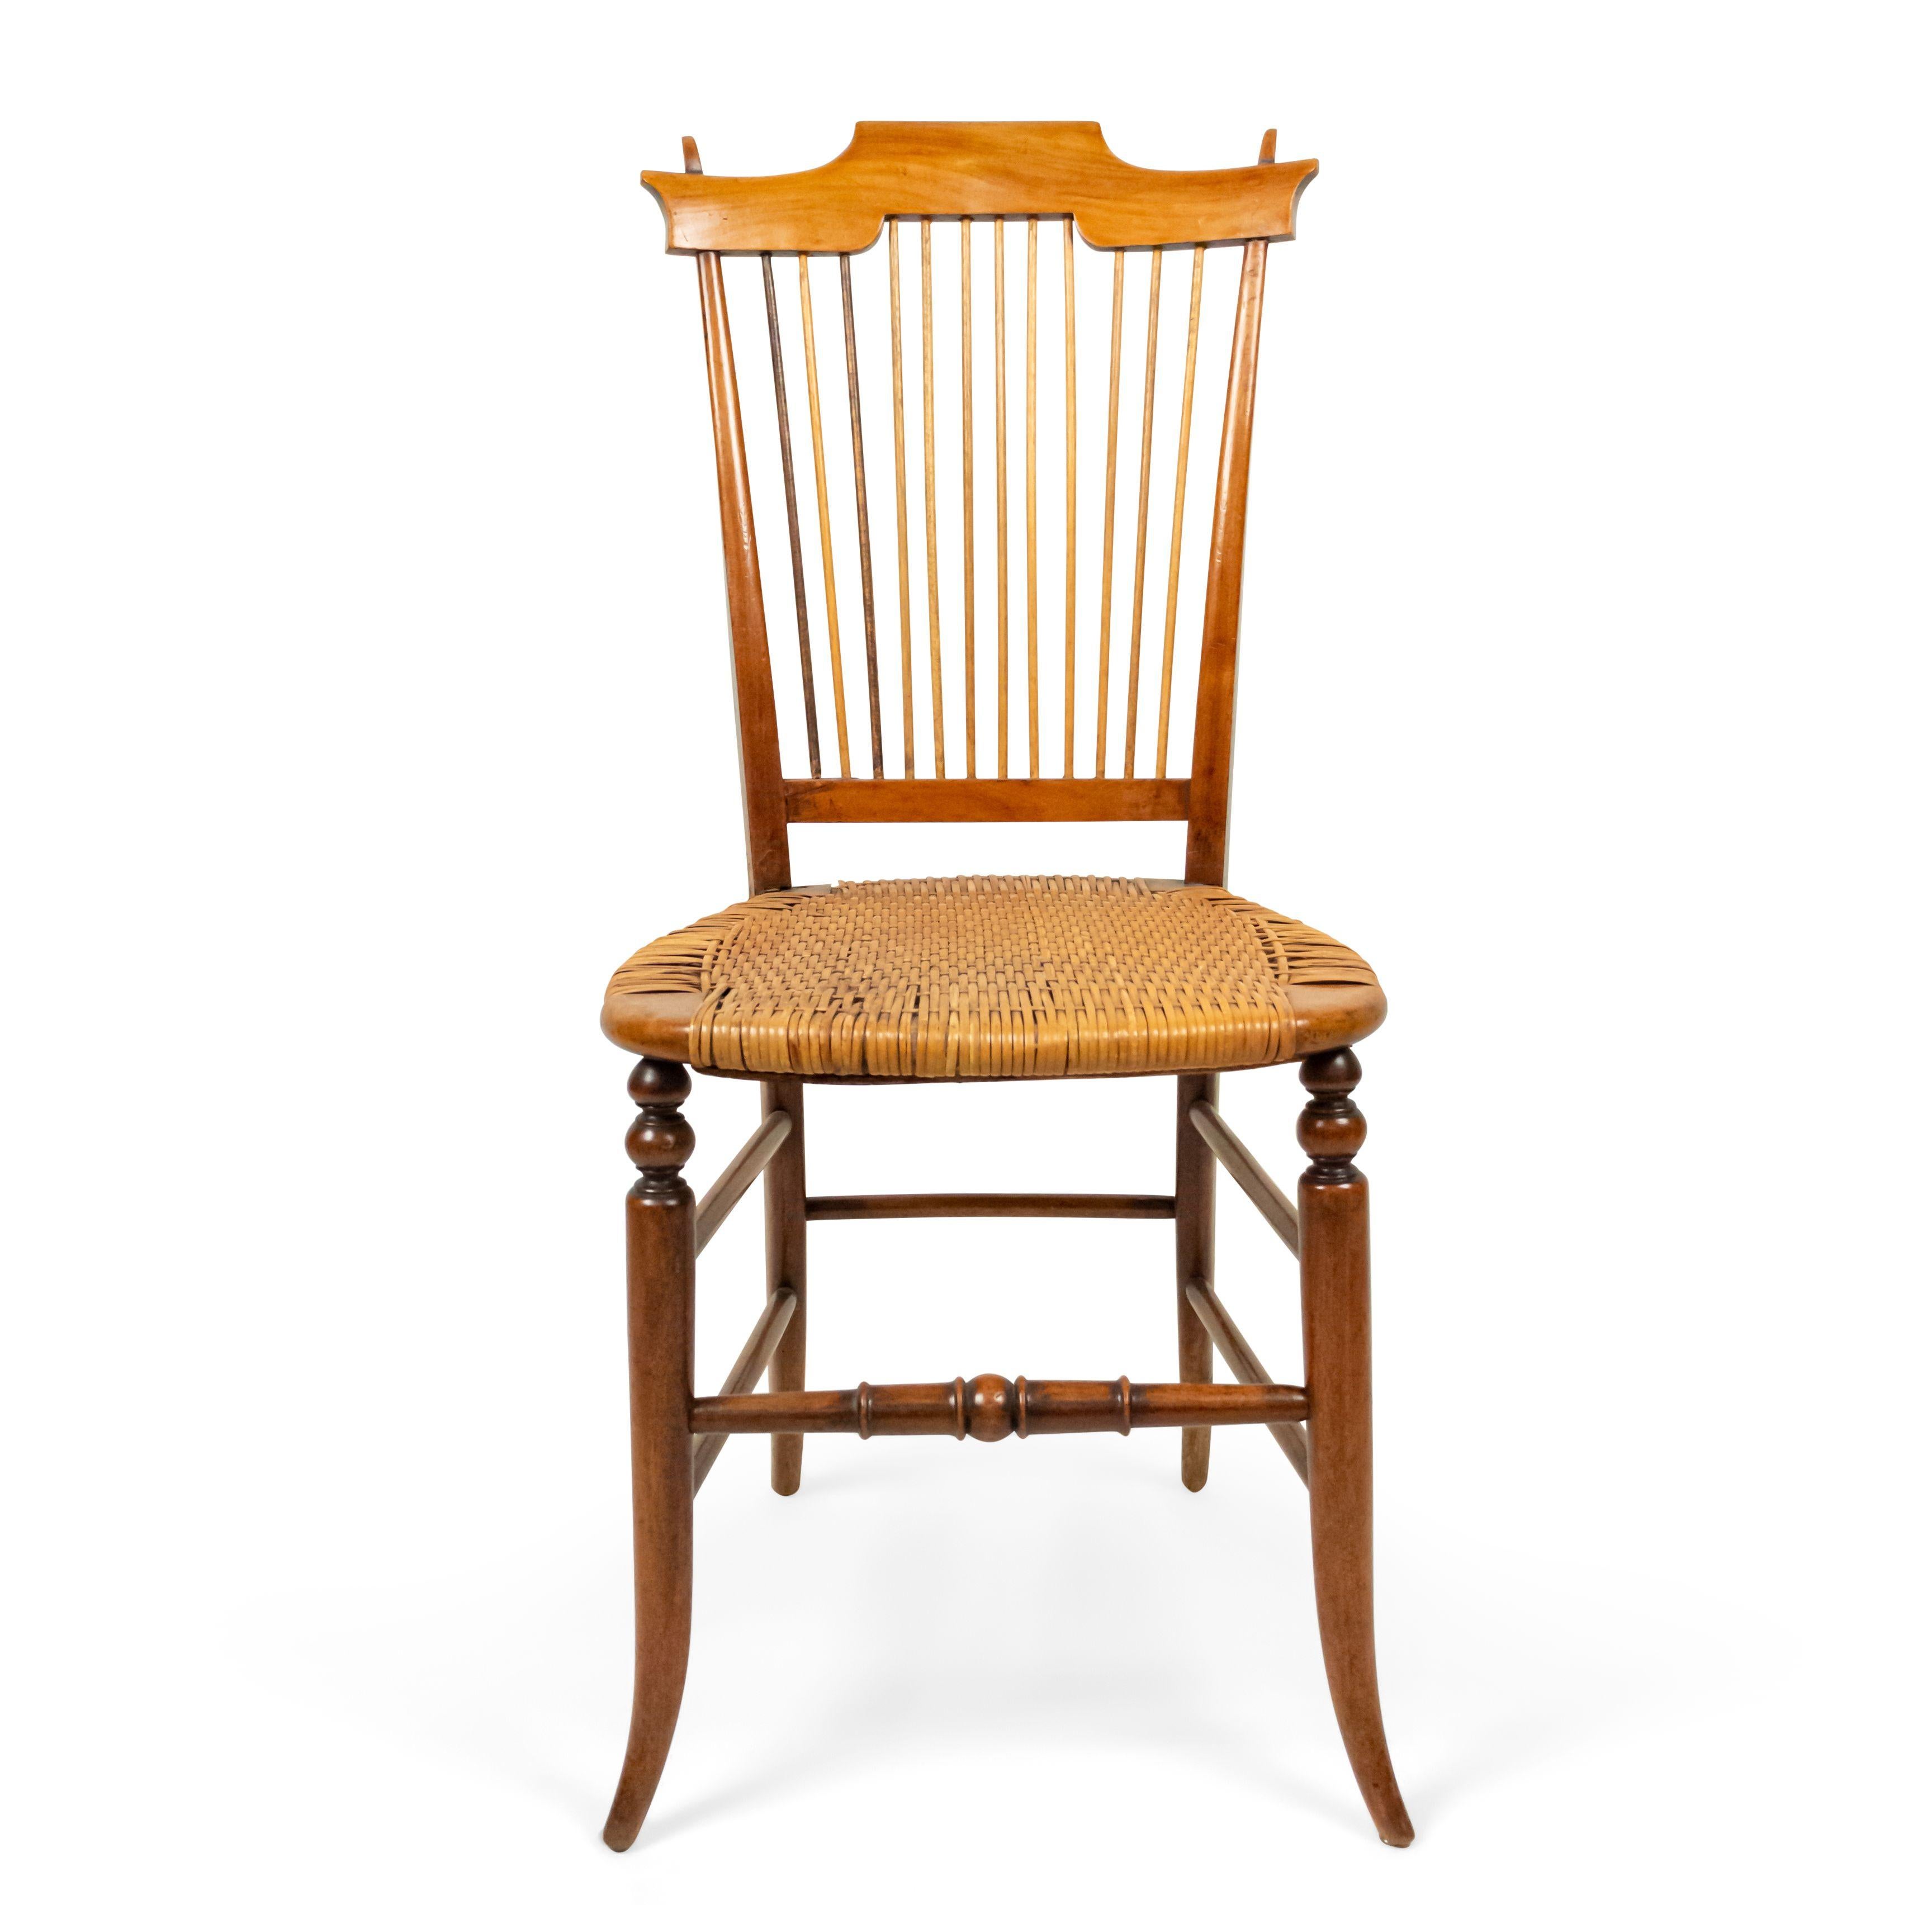 English country (19th century) maple spindle back side chair with wicker seat.